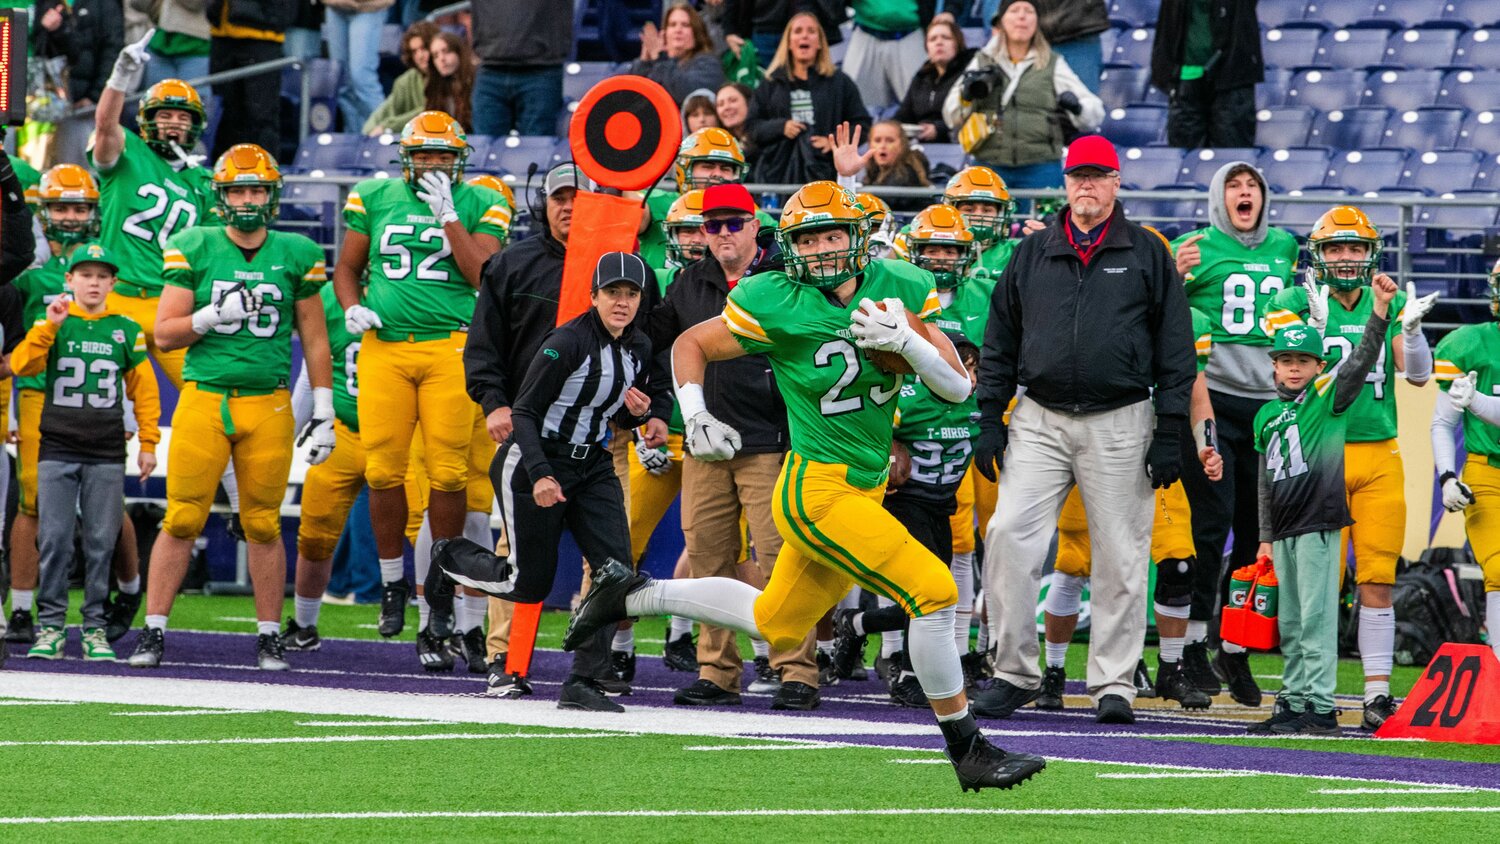 Running back Cash Short scores Tumwater’s first touchdown of the state title game against Anacortes.